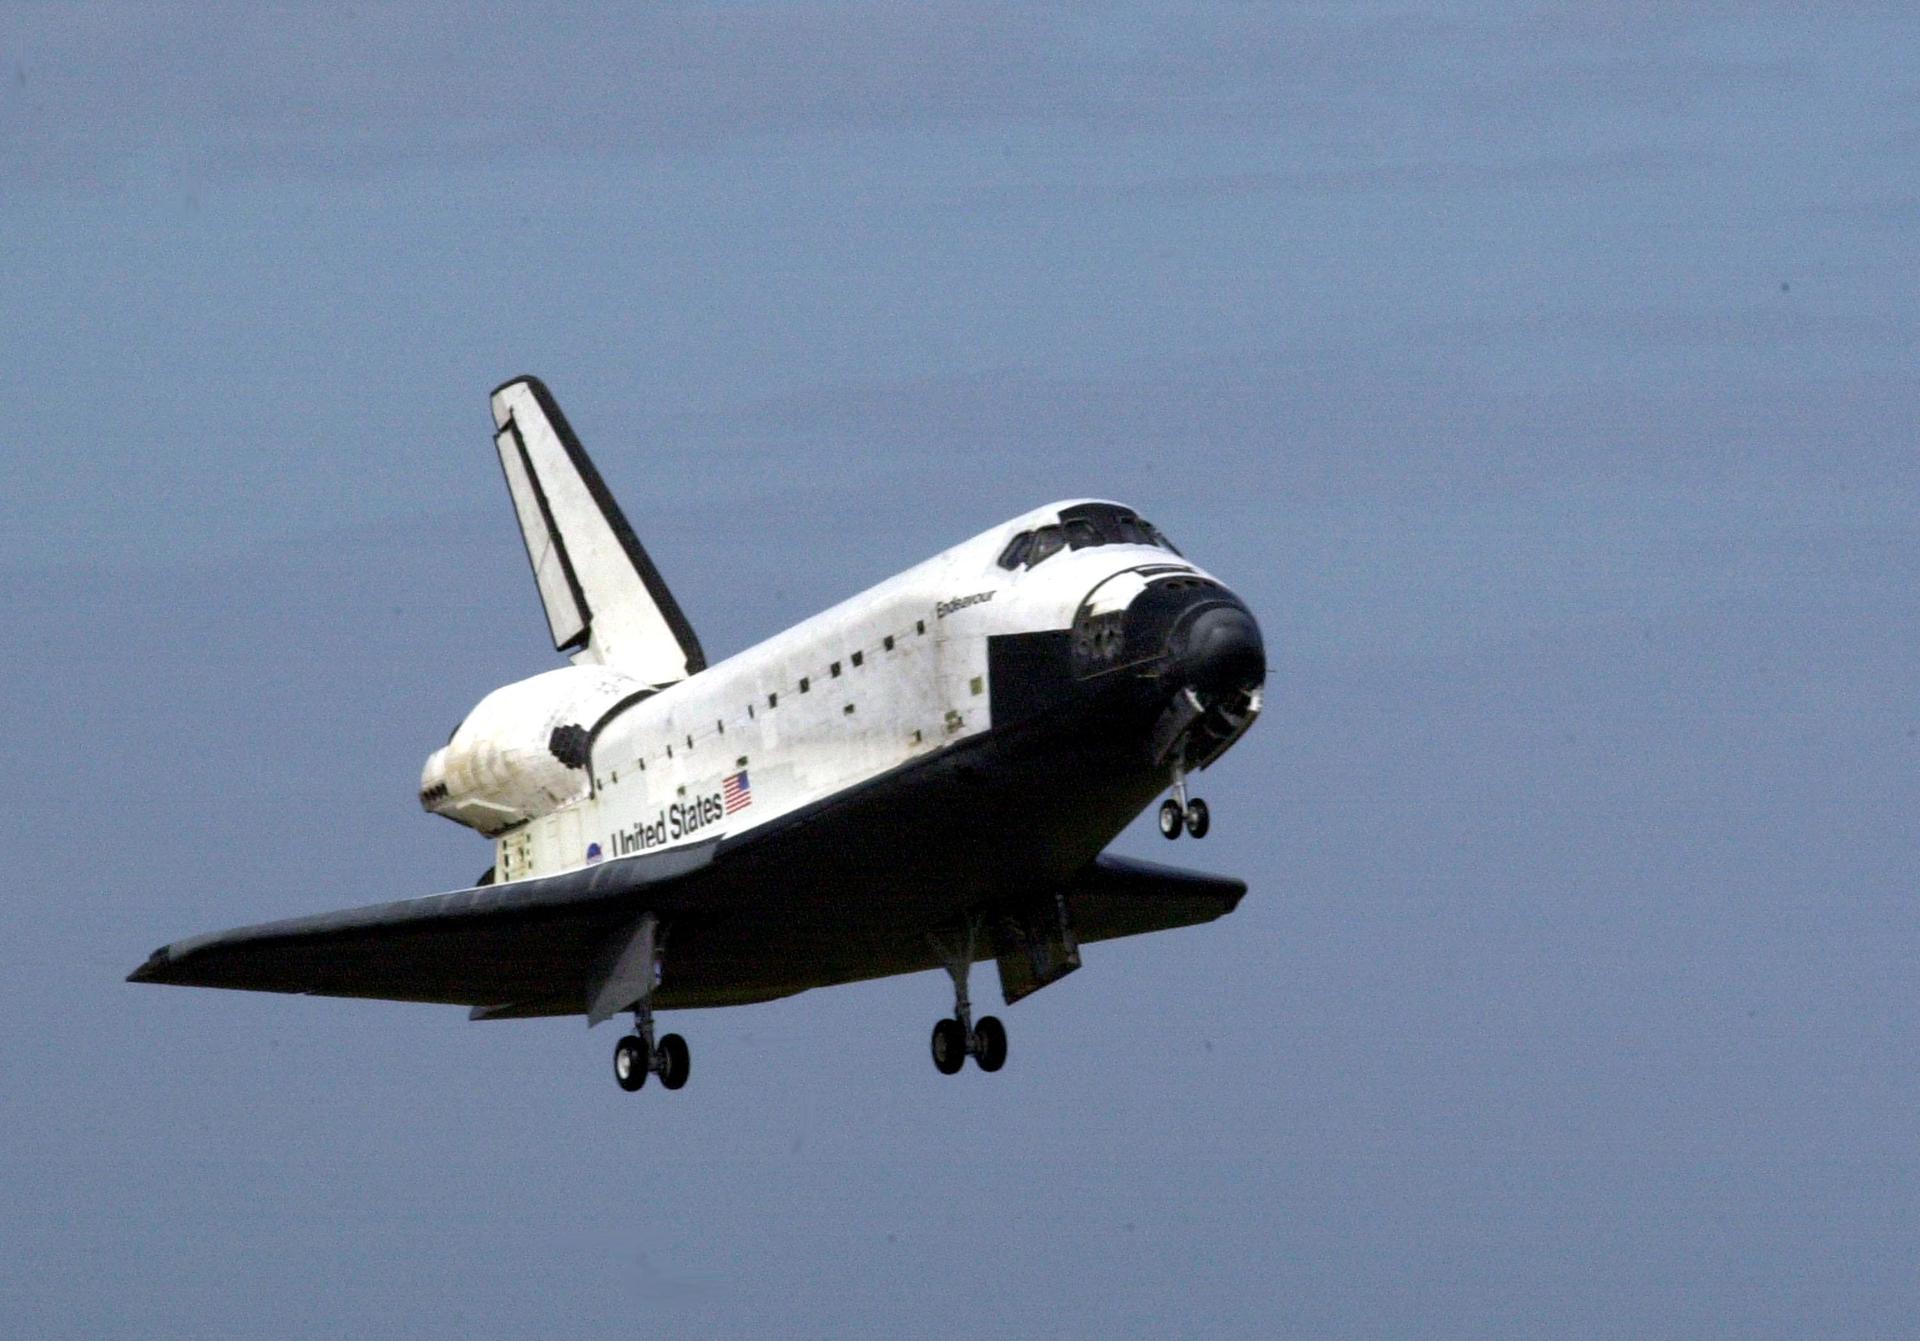 Space shuttle Endeavour approaching for a landing